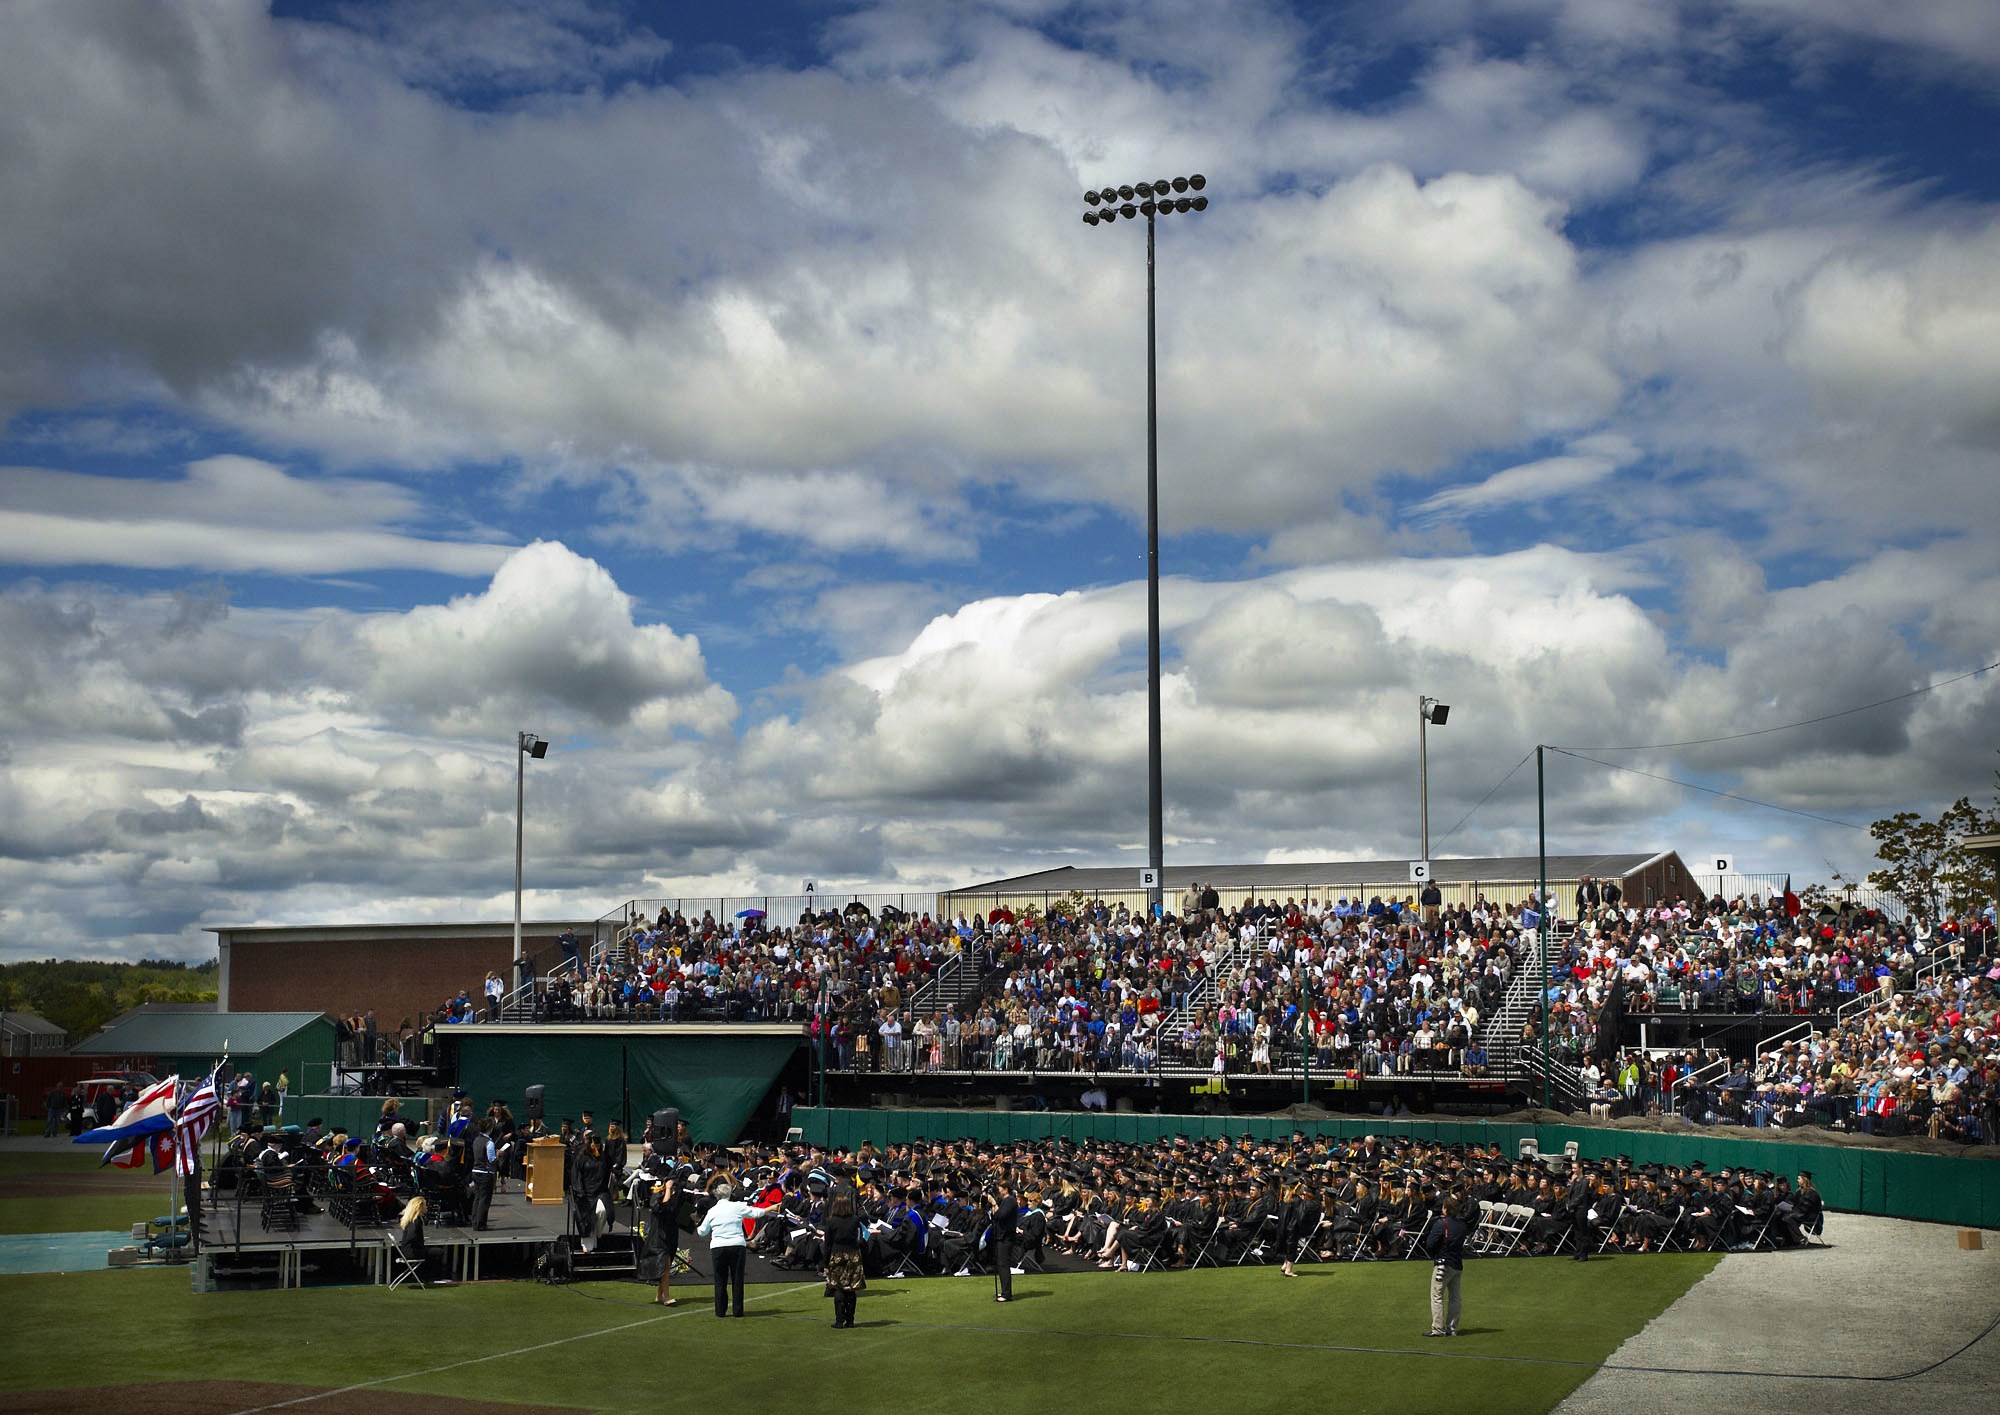 All of this year's valedictorians and salutatorians will be recognized for their academic accomplishments along with the rest of the Class of 2021 at Husson University’s 122nd Annual Commencement Exercises, on Saturday, May 8 at 10 a.m. and 2 p.m. at the Dr. John W. Winkin Sports Complex. The 10 a.m. Commencement ceremony will be for students who have completed master’s degrees, doctoral degrees and/or graduate certificates while the 2 p.m. Commencement ceremony will be for all undergraduate students. 

Both ceremonies will be held outdoors in accordance with CDC guidelines. All graduating students and their guests will be required to wear masks and maintain physical distancing during the events. This year, Husson University will award over 838 degrees to 743 graduates. 
